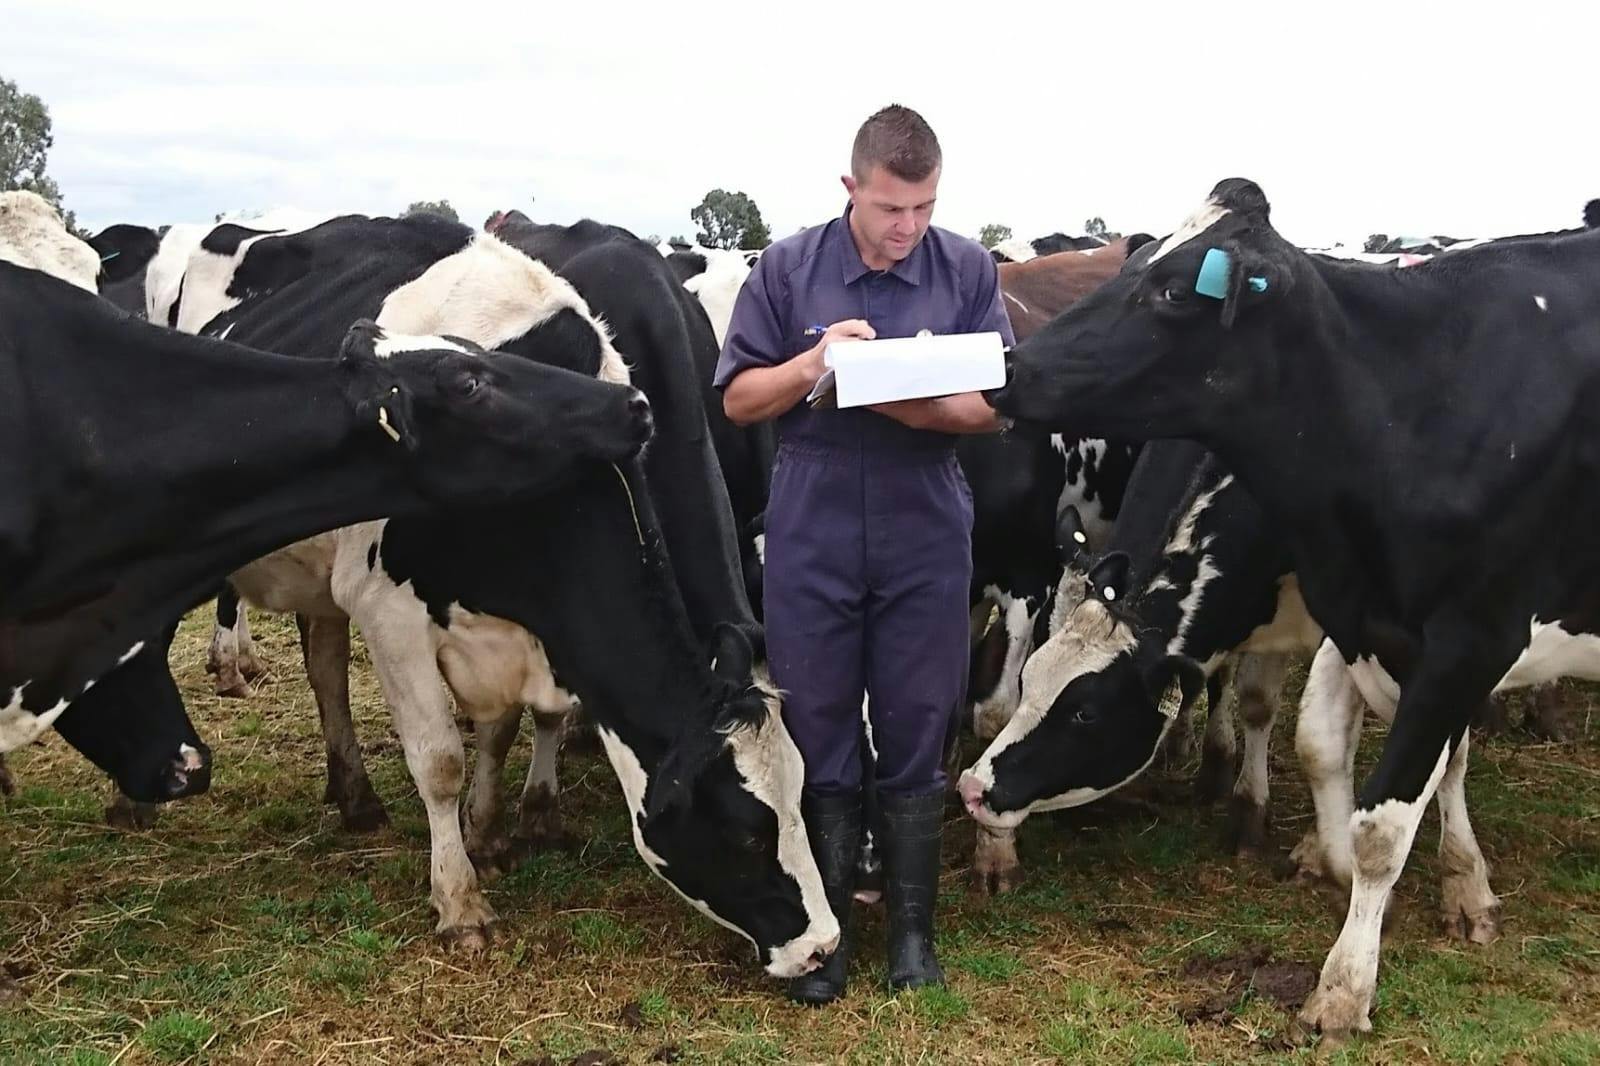 Ash Phipps, BVSc (Hons1), GradCertVPH(EAD), MVS, MVSc (Clinical), FANZCVS (Dairy Cattle Medicine and Management), standing with cattle (Image courtesy of Phipps) 